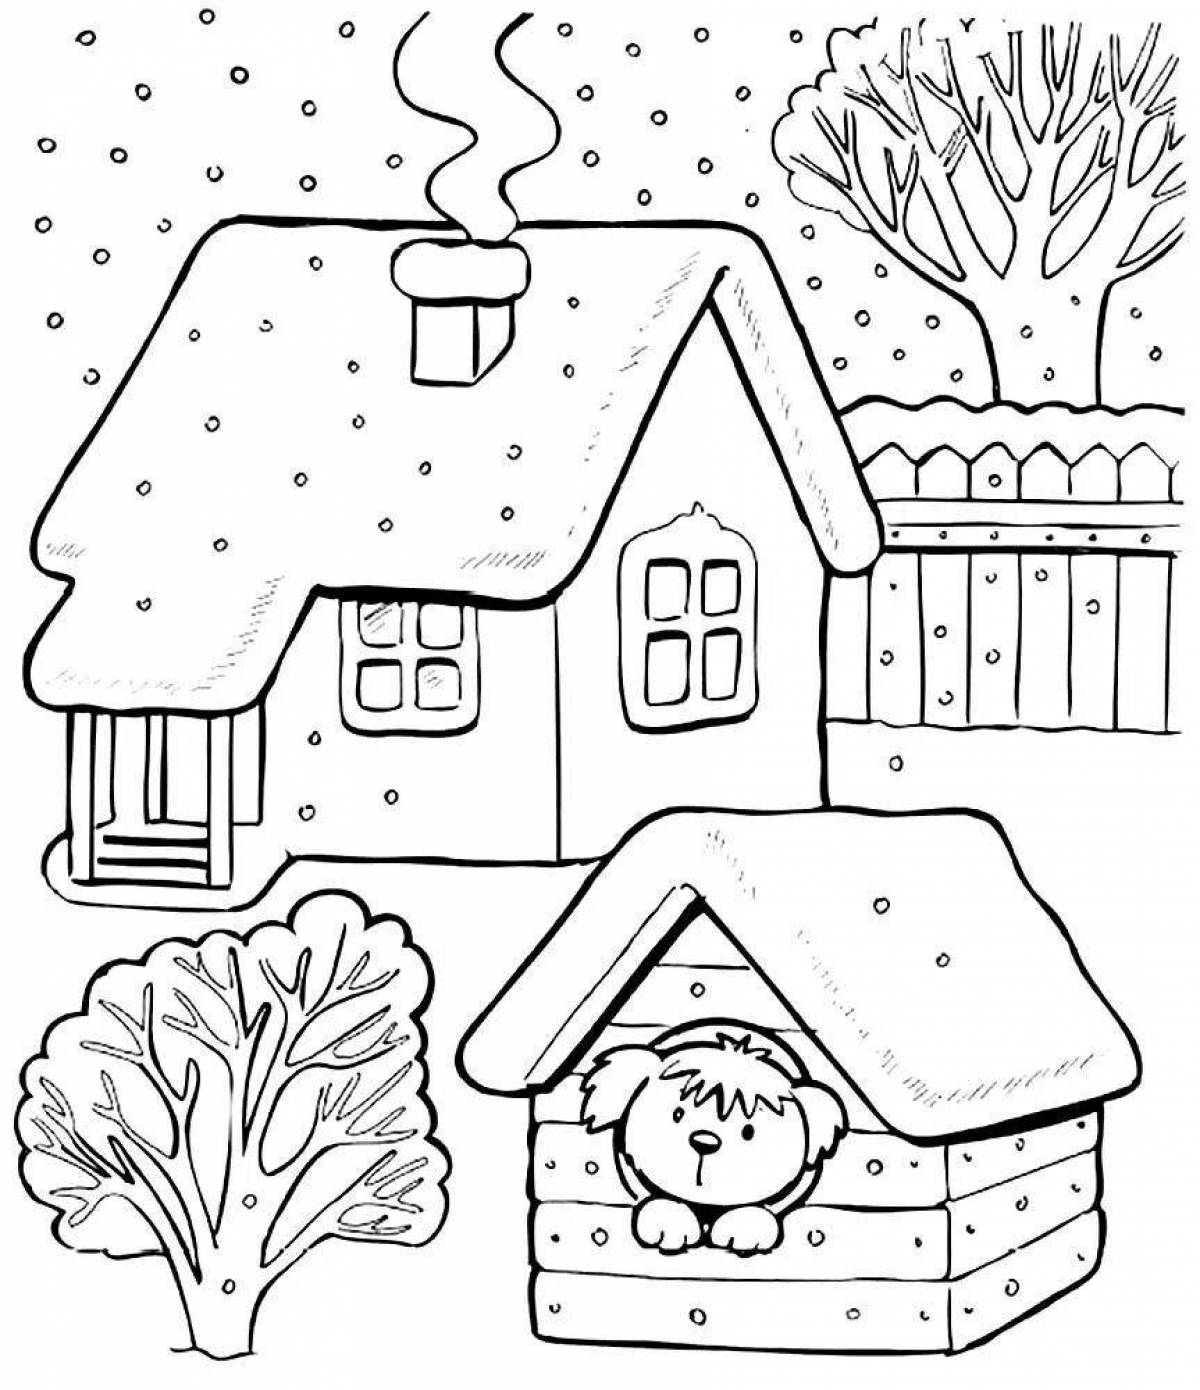 Coloring page for kids joyful country house